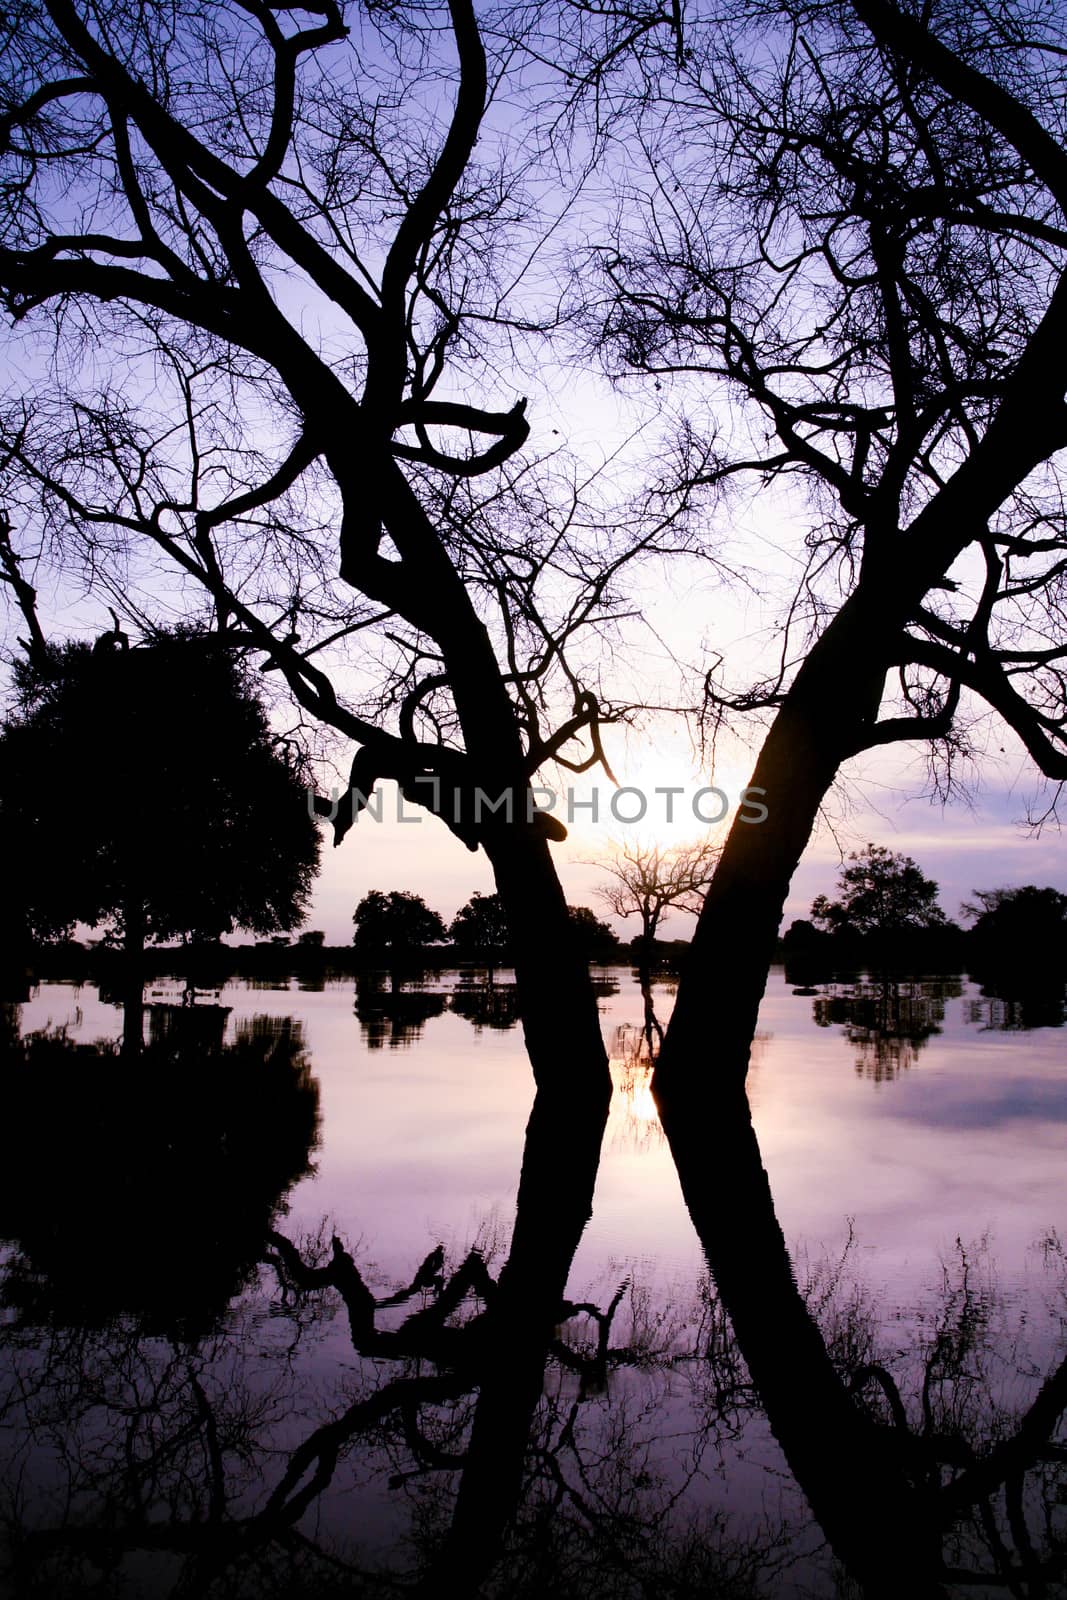 Tree with reflection in the water